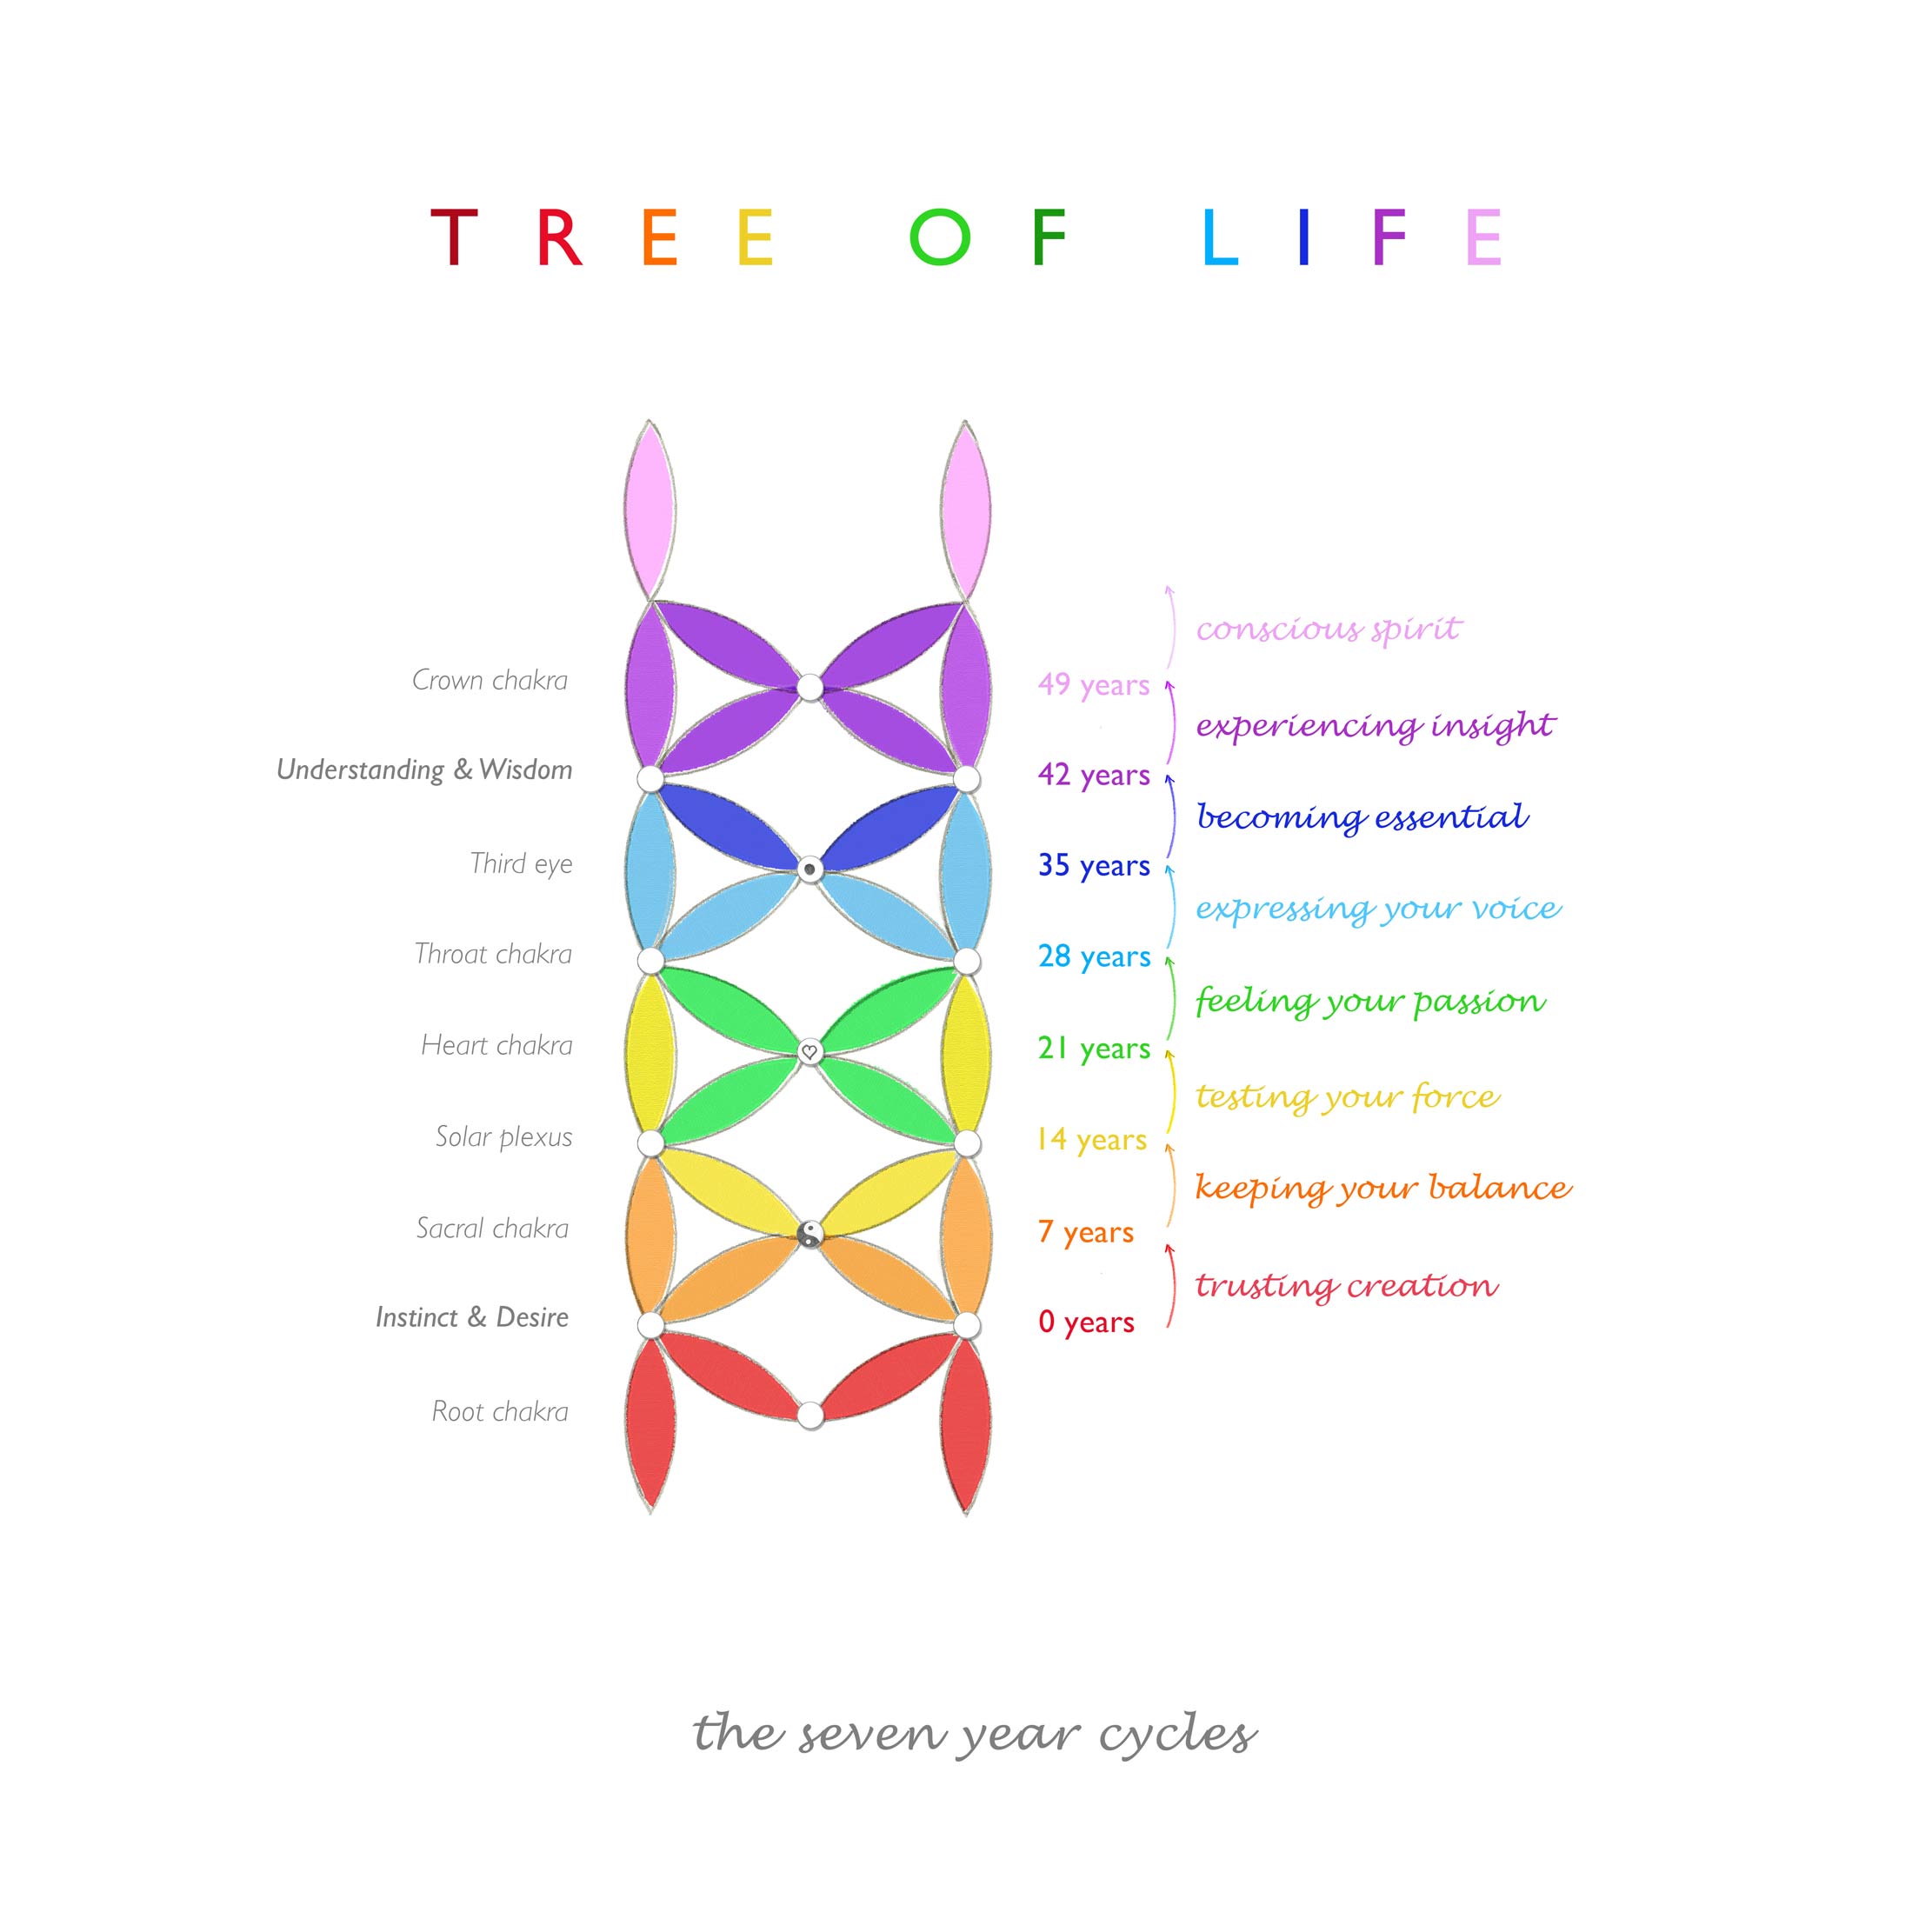 Tree of Life | the seven year cycles